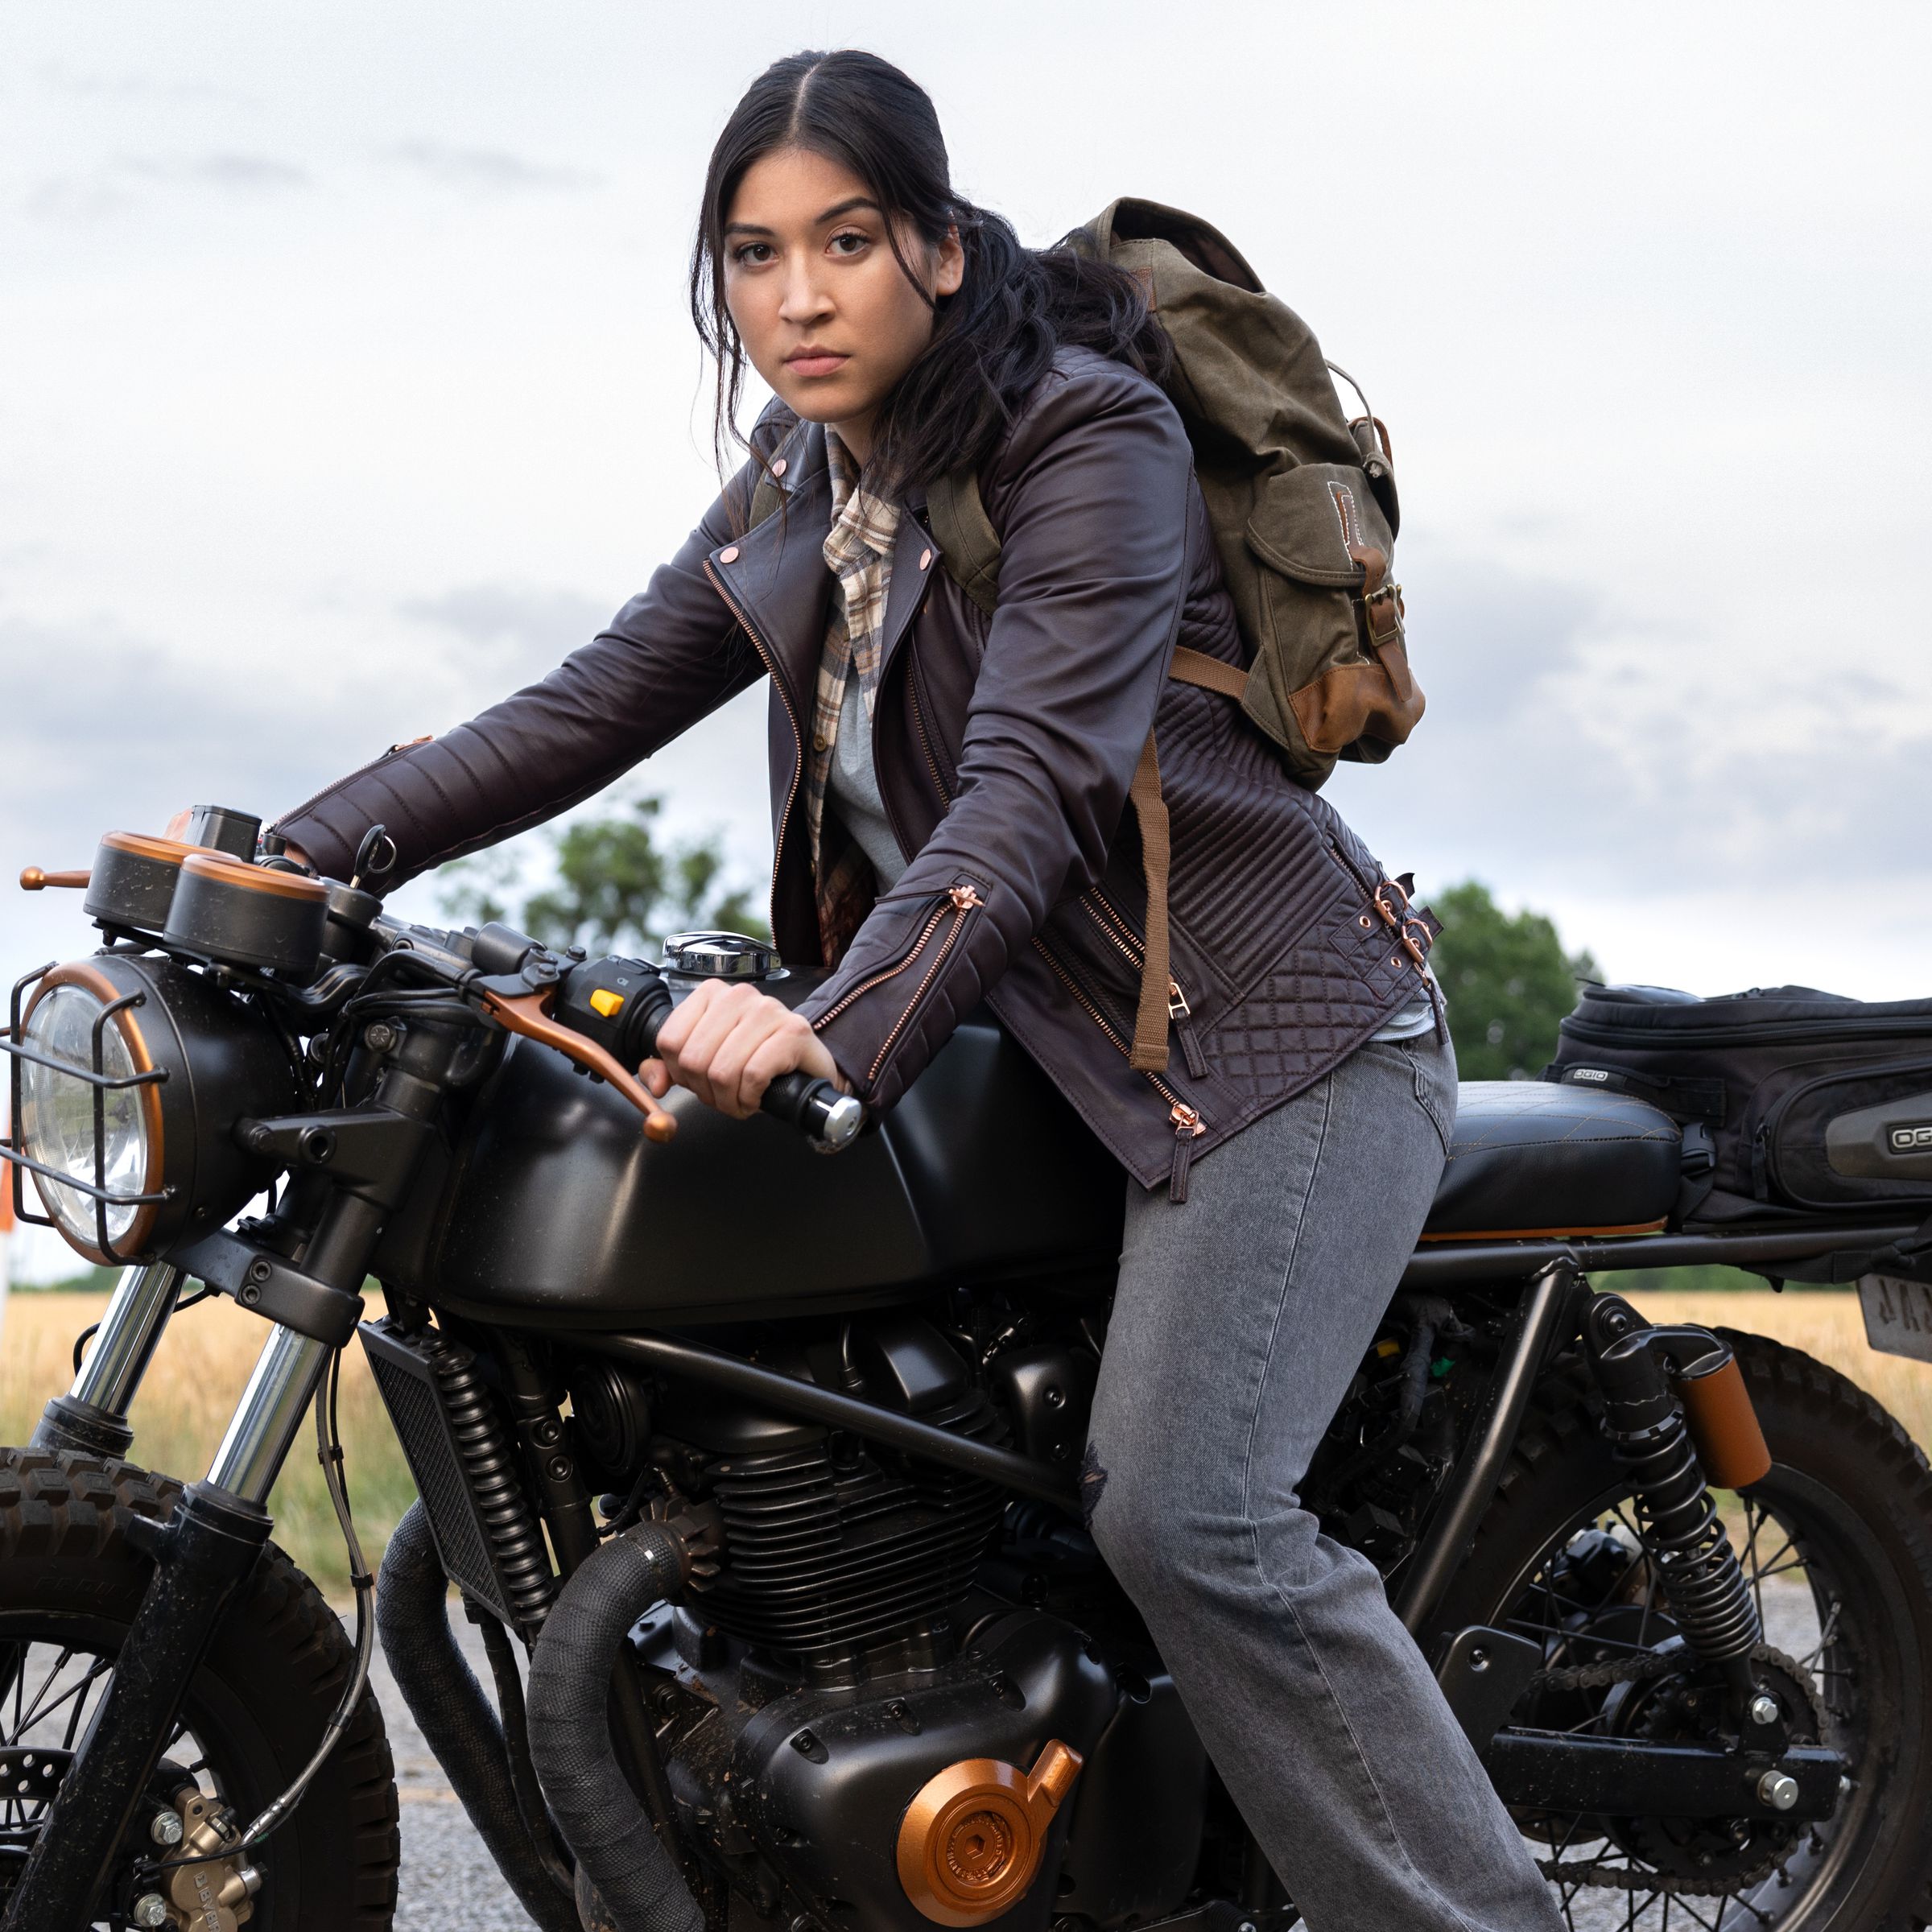 A wide shot of a woman with long black hair tied back in a pony tail, wearing a leather jacket, jeans, and straddling a motor cycle.